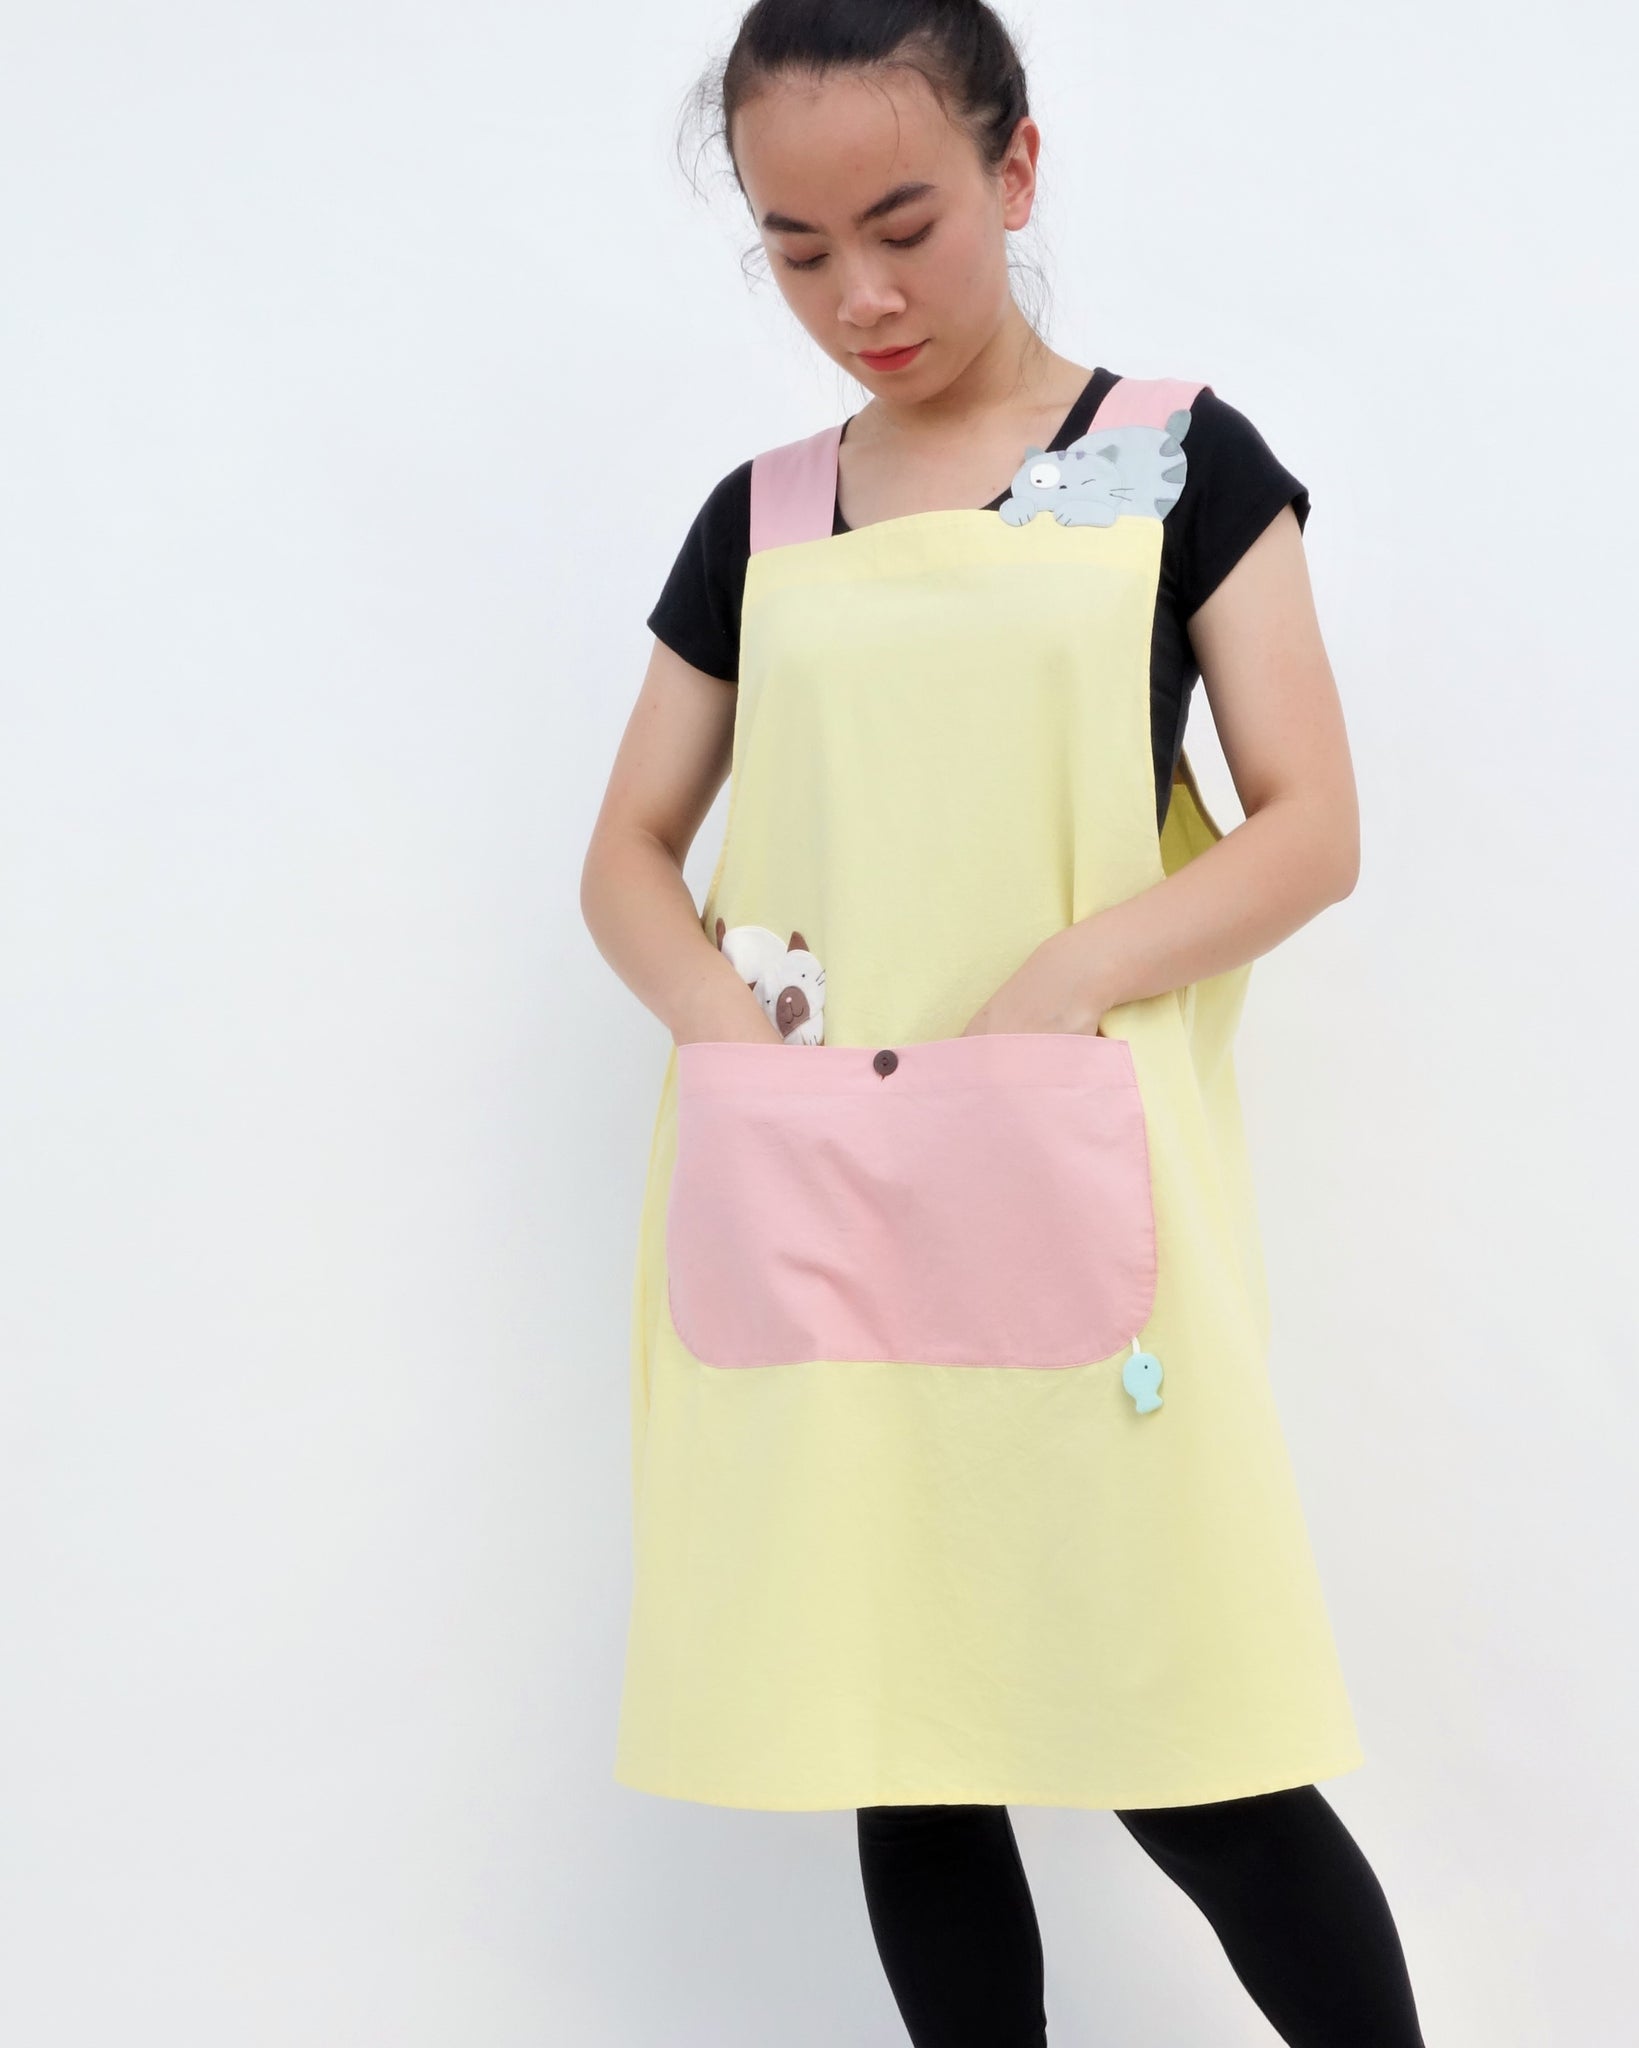 Woman wearing pink and yellow color-blocked apron with cat appliqué, large front pocket, in front close-up view.